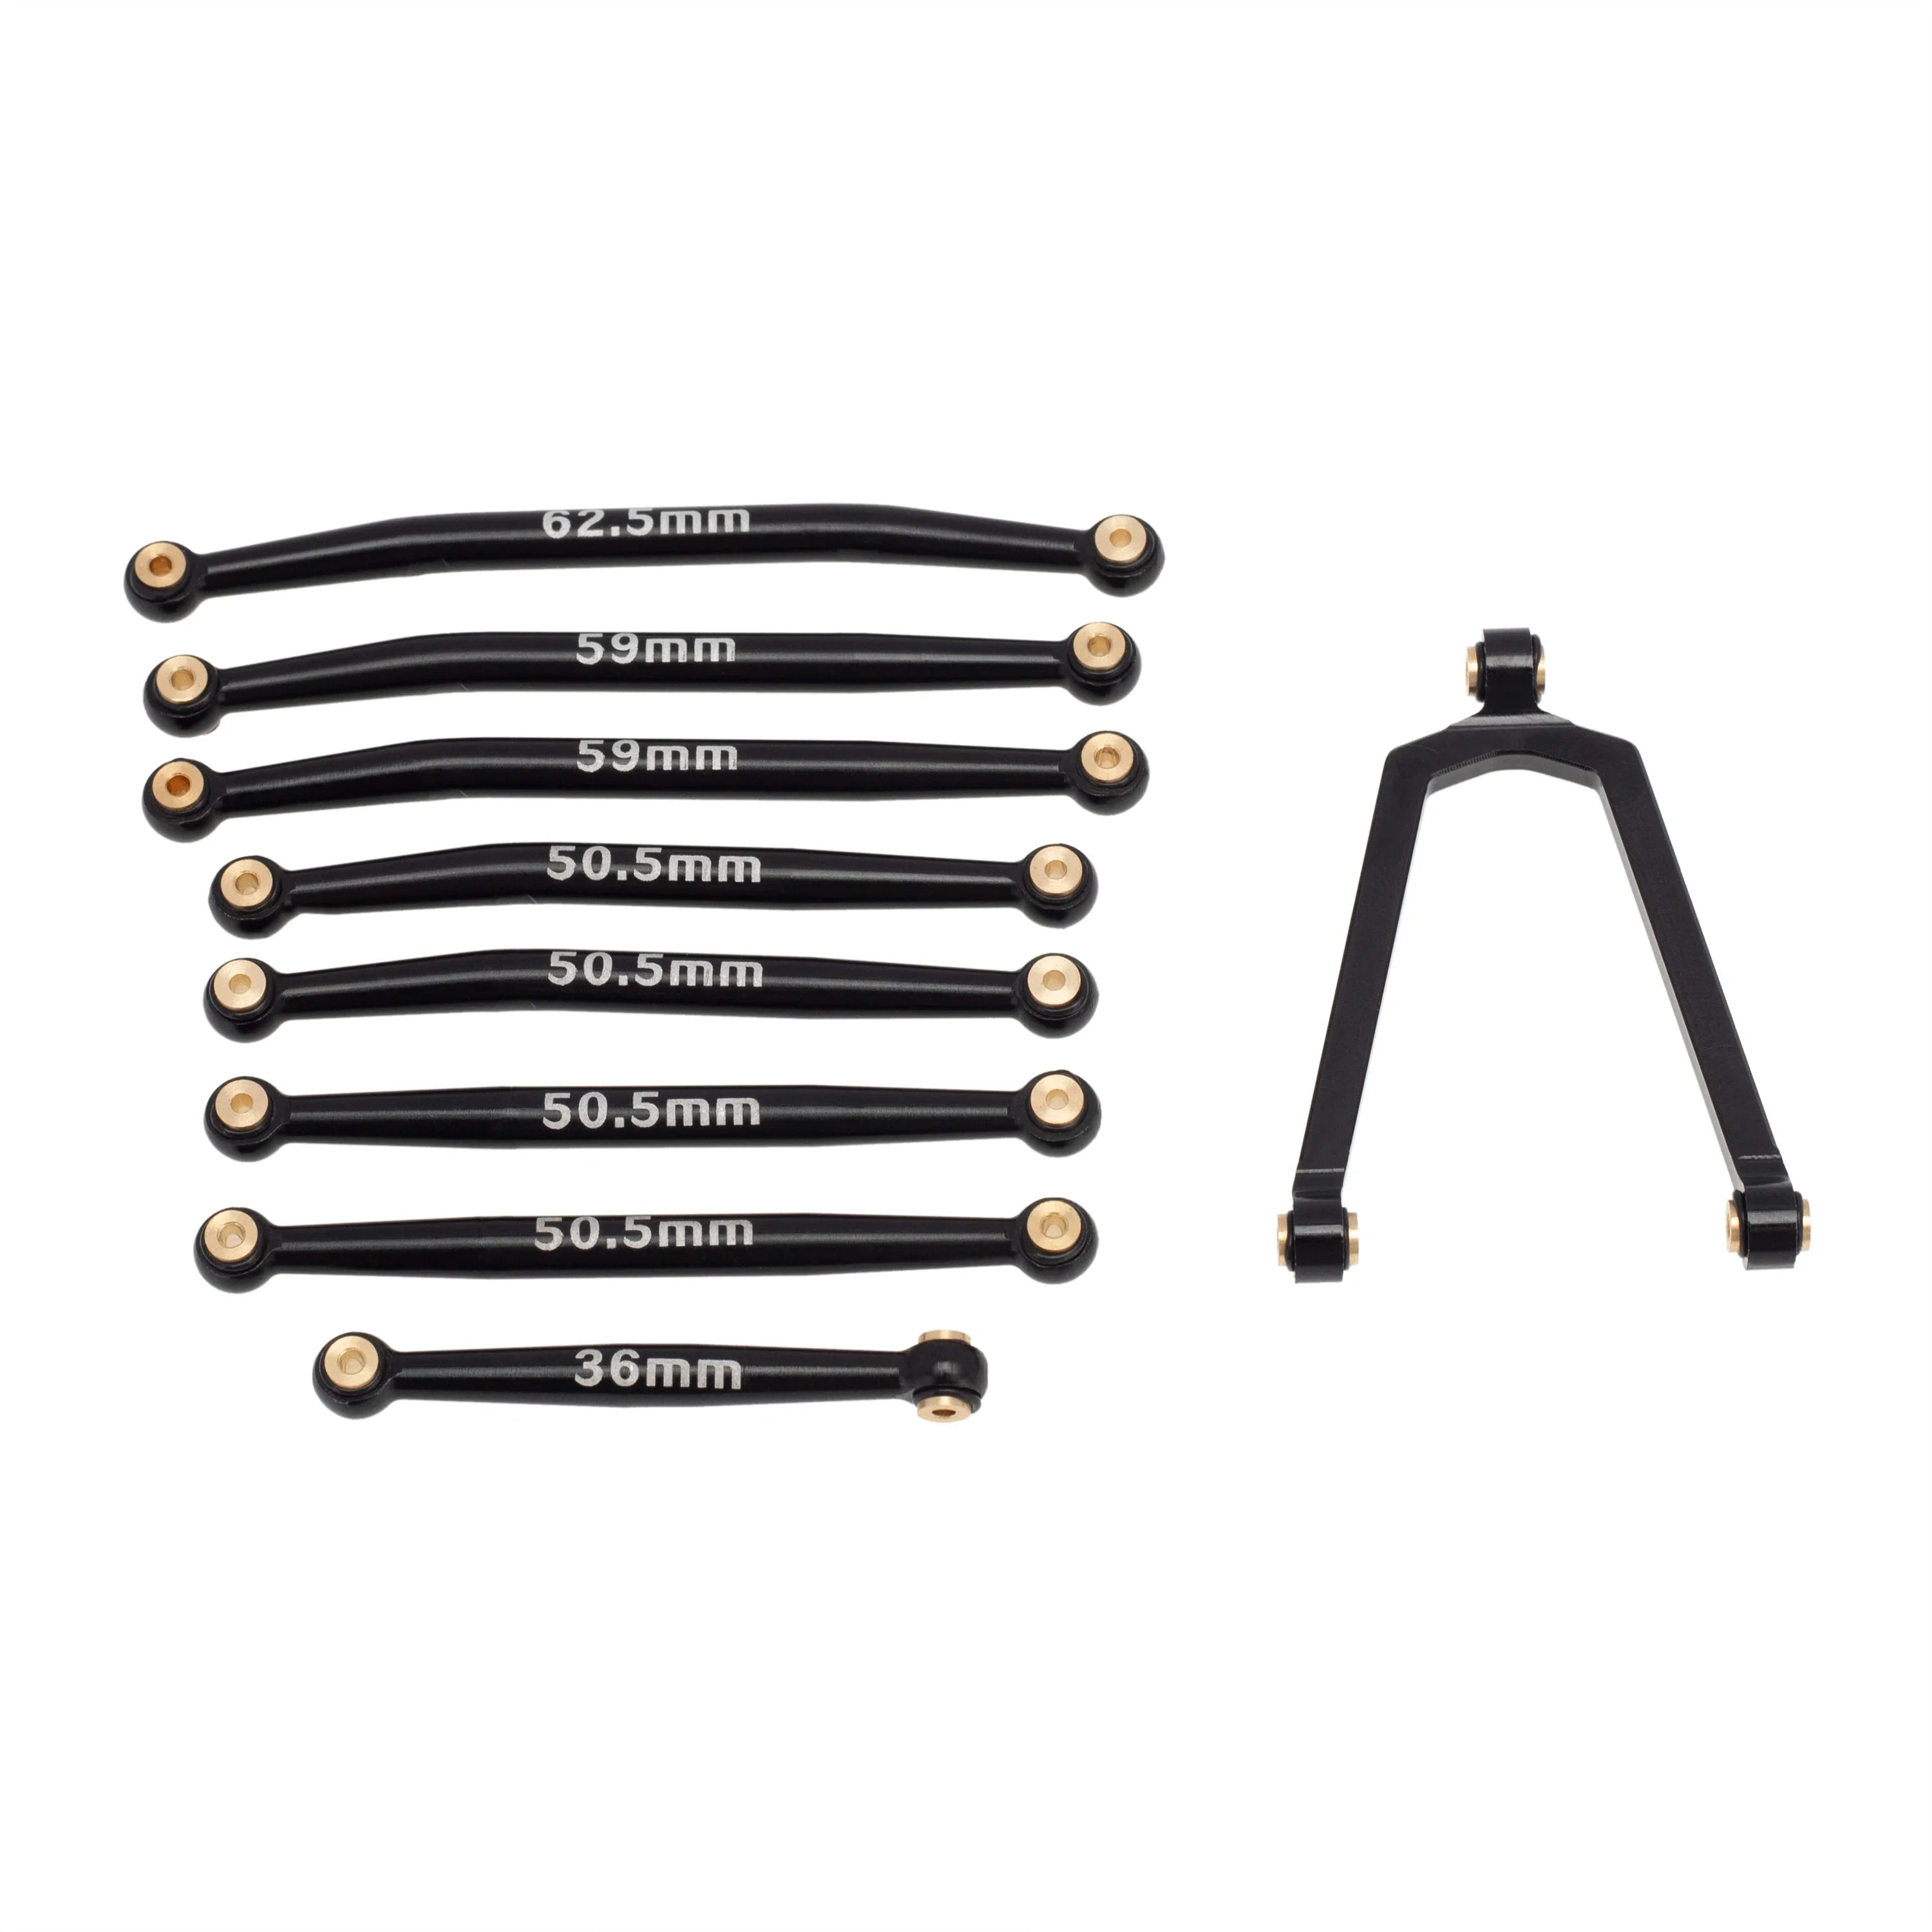 MEUS RACING Aluminum Alloy Chassis Tie Rod and Steering Rod Kit for Axial SCX24 90081 1/24 RC Car (Black) - HeliDirect